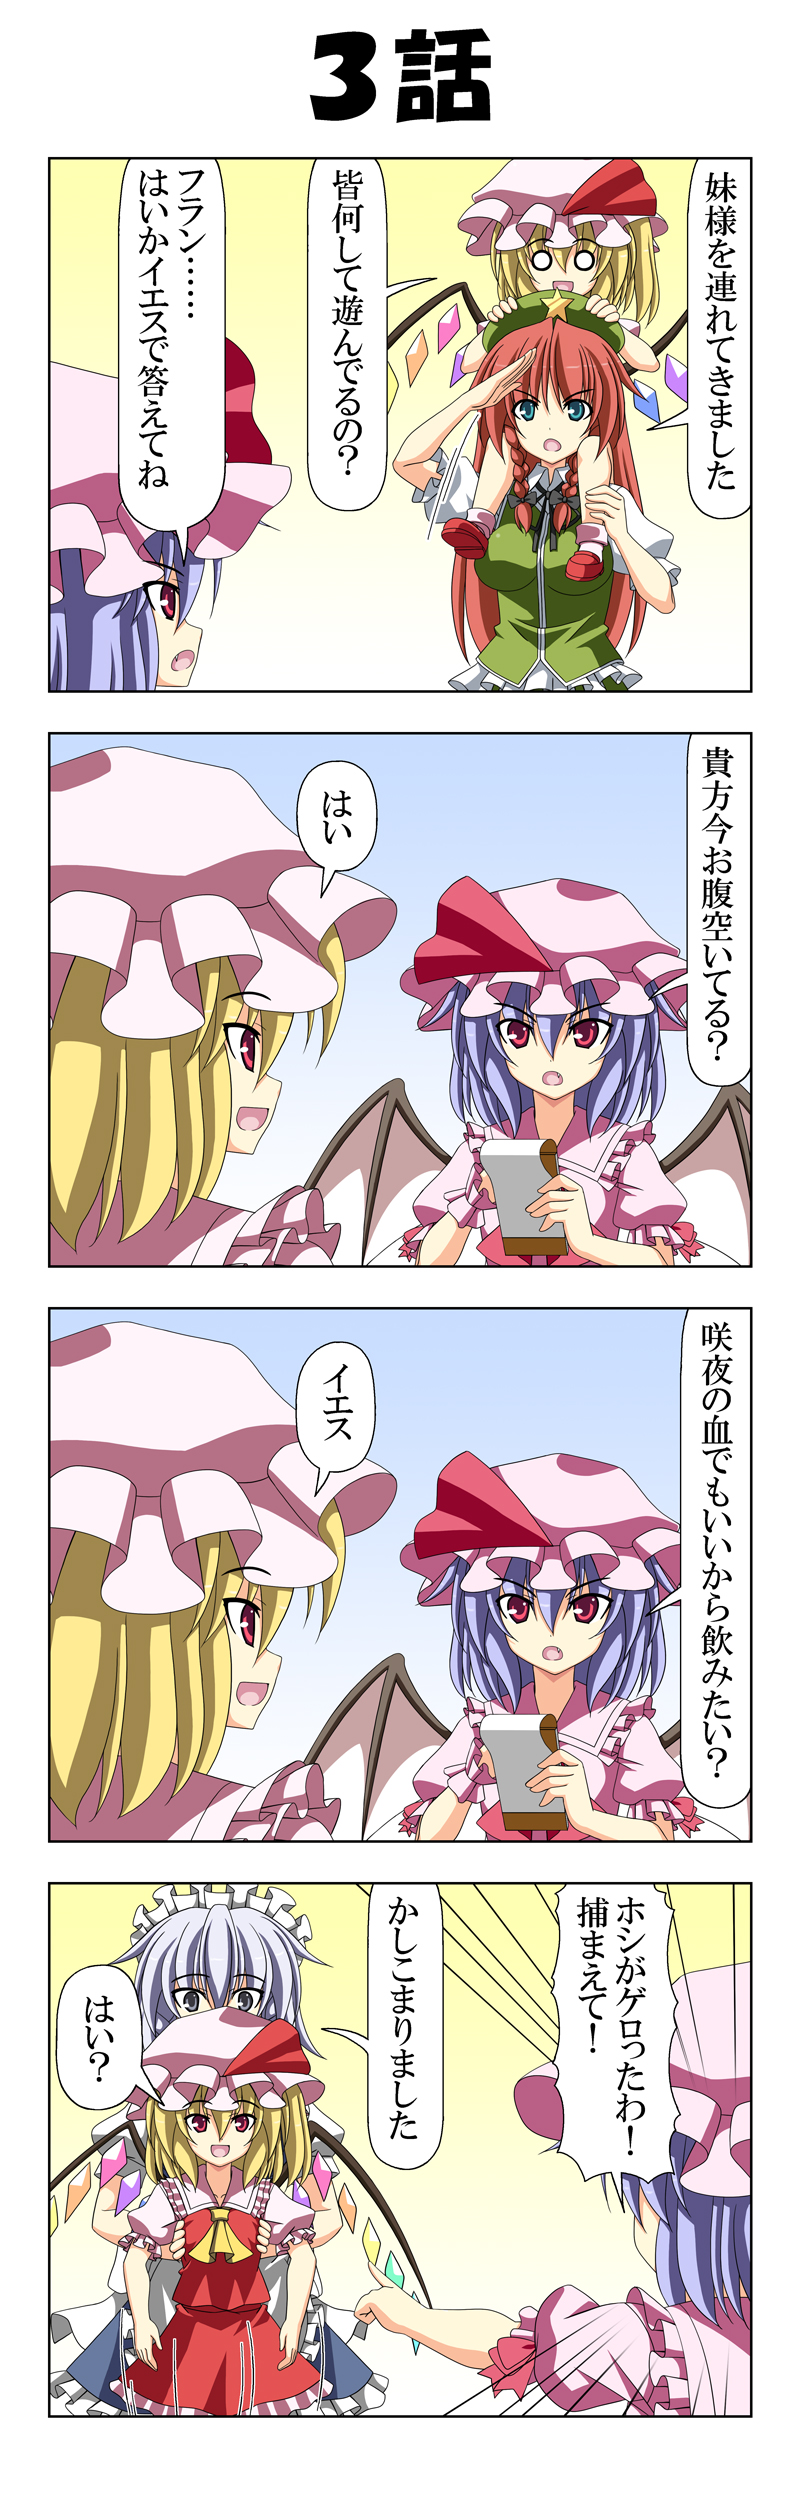 4girls 4koma absurdres apron blonde_hair braid carrying comic eyebrows_visible_through_hair flandre_scarlet green_eyes grey_eyes hair_between_eyes hand_on_another's_head hand_on_another's_leg hat hat_ribbon highres holding_person hong_meiling izayoi_sakuya lavender_hair long_hair maid maid_apron maid_headdress mob_cap multiple_girls notepad open_mouth pointing rappa_(rappaya) red_eyes red_hairr remilia_scarlet ribbon salute shoulder_carry silver_hair skirt smile star touhou translation_request wide-eyed